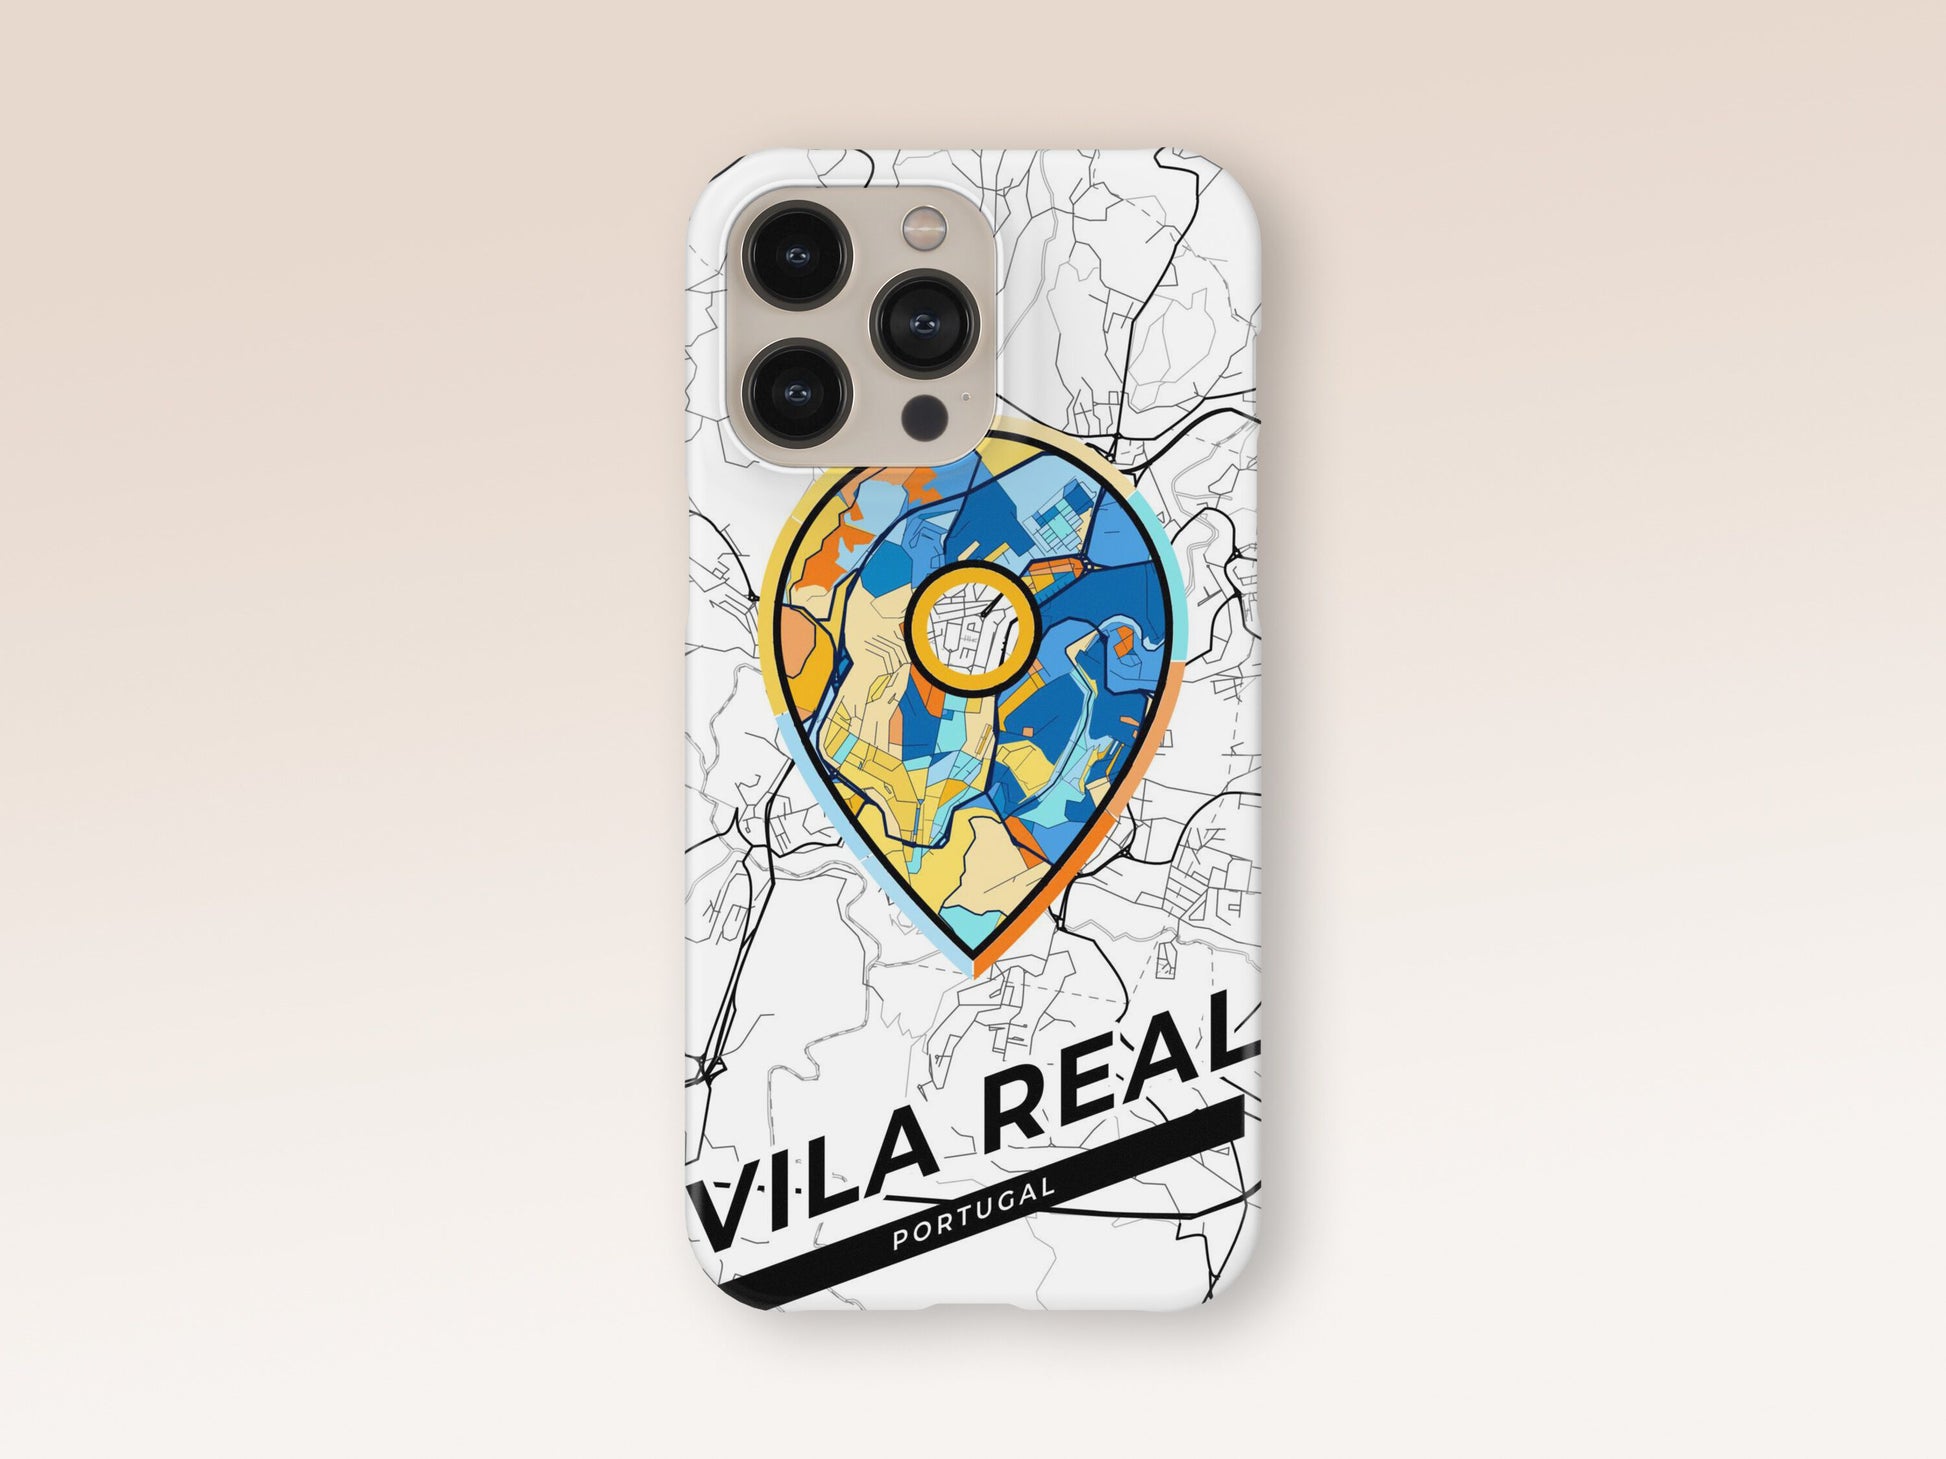 Vila Real Portugal slim phone case with colorful icon 1